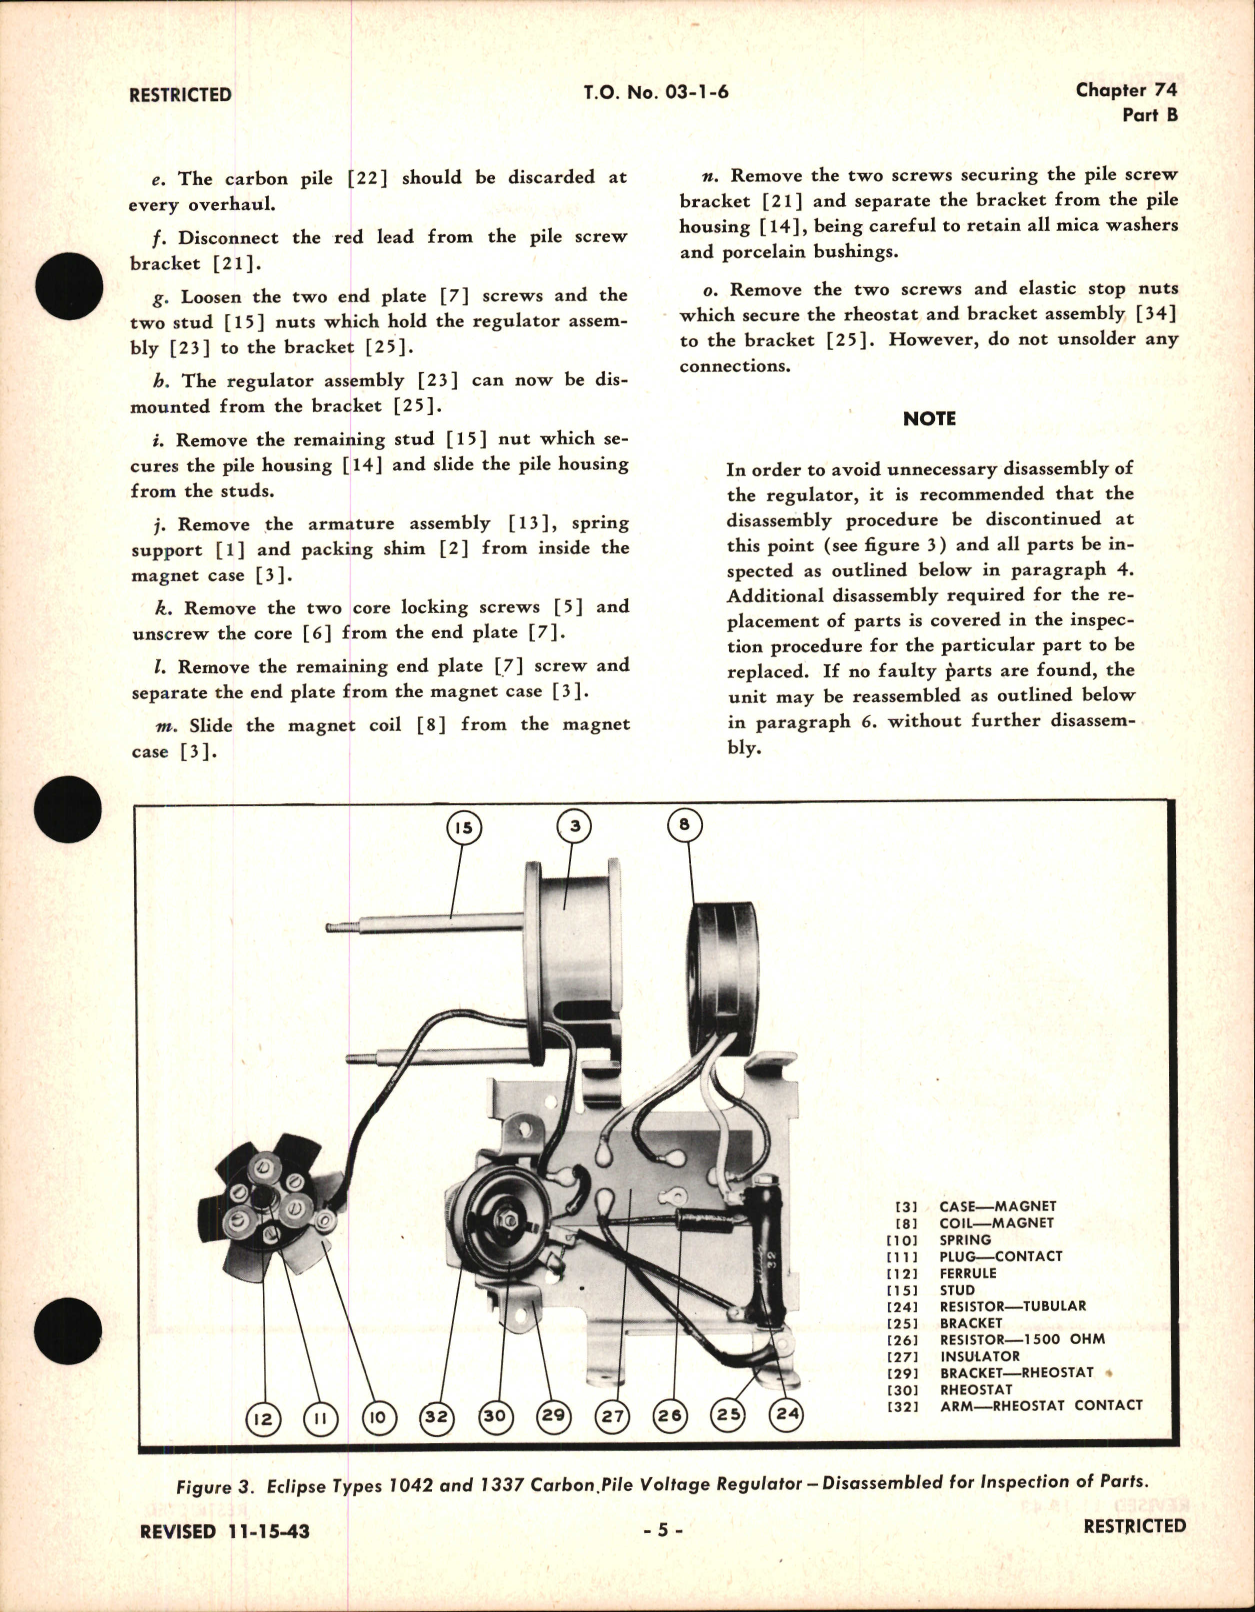 Sample page 5 from AirCorps Library document: Overhaul Instructions for Carbon Pile Voltage Regulator, Ch 74 Part B